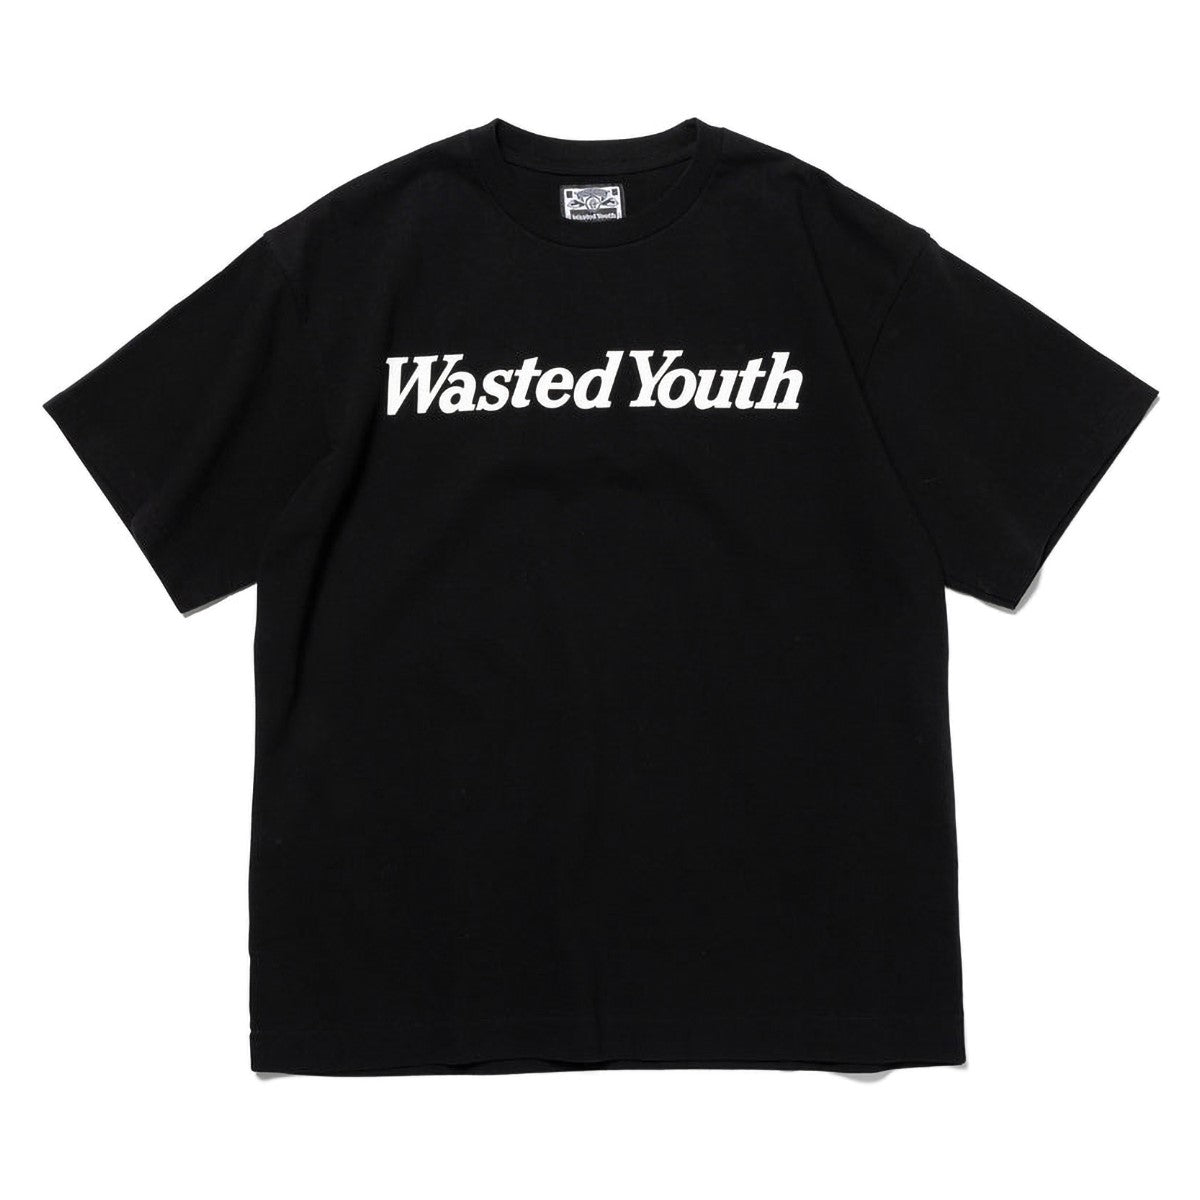 Wasted Youth Soccer Shirt Black 2XL即完売の品希少